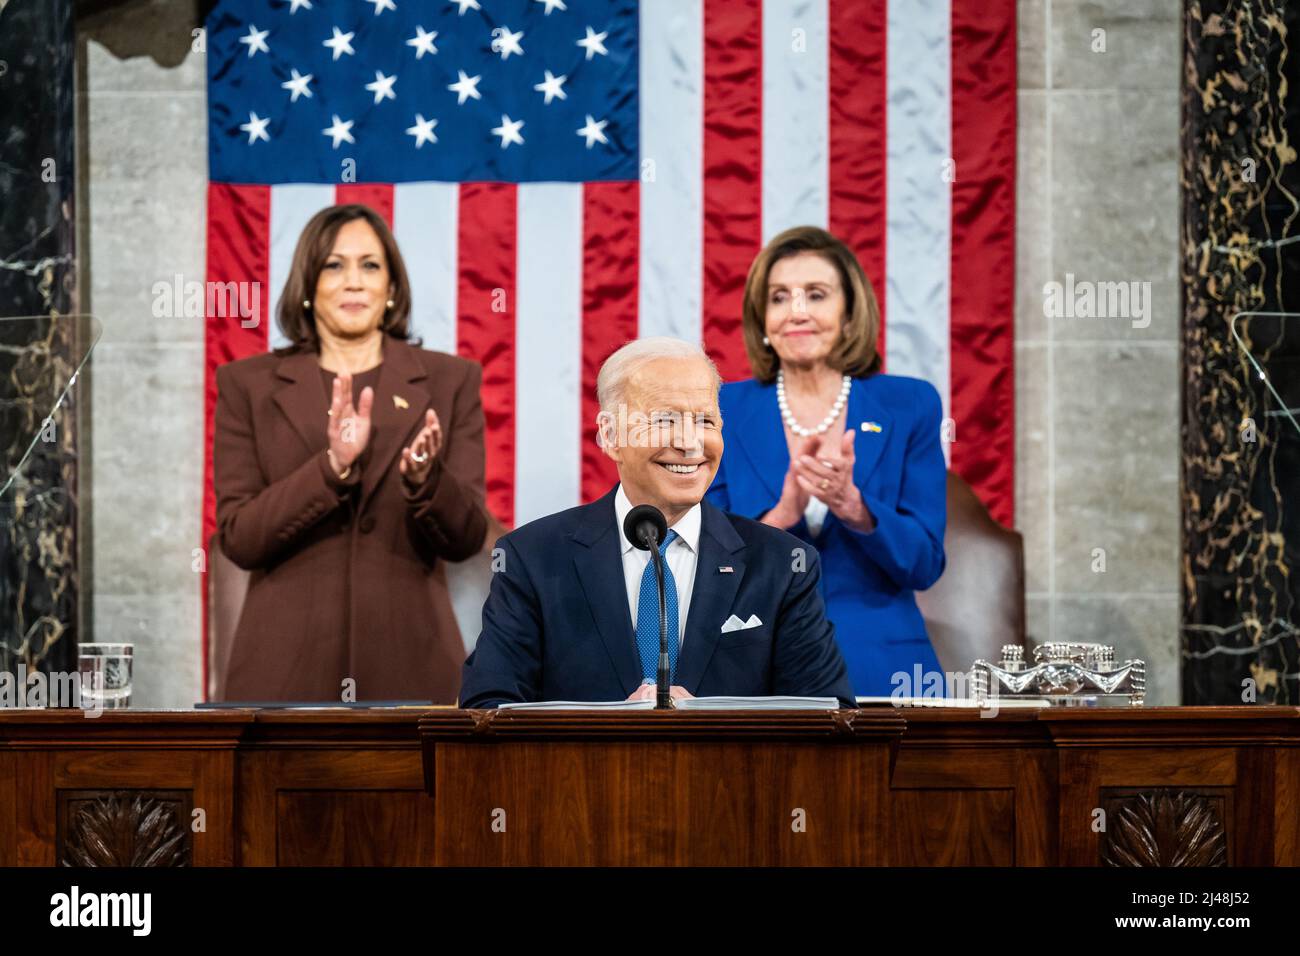 WASHINGTON DC, USA - 01 mARCH 2022 - US President Joe Biden delivers his State of the Union address to a joint session of Congress, Tuesday, March 1, Stock Photo